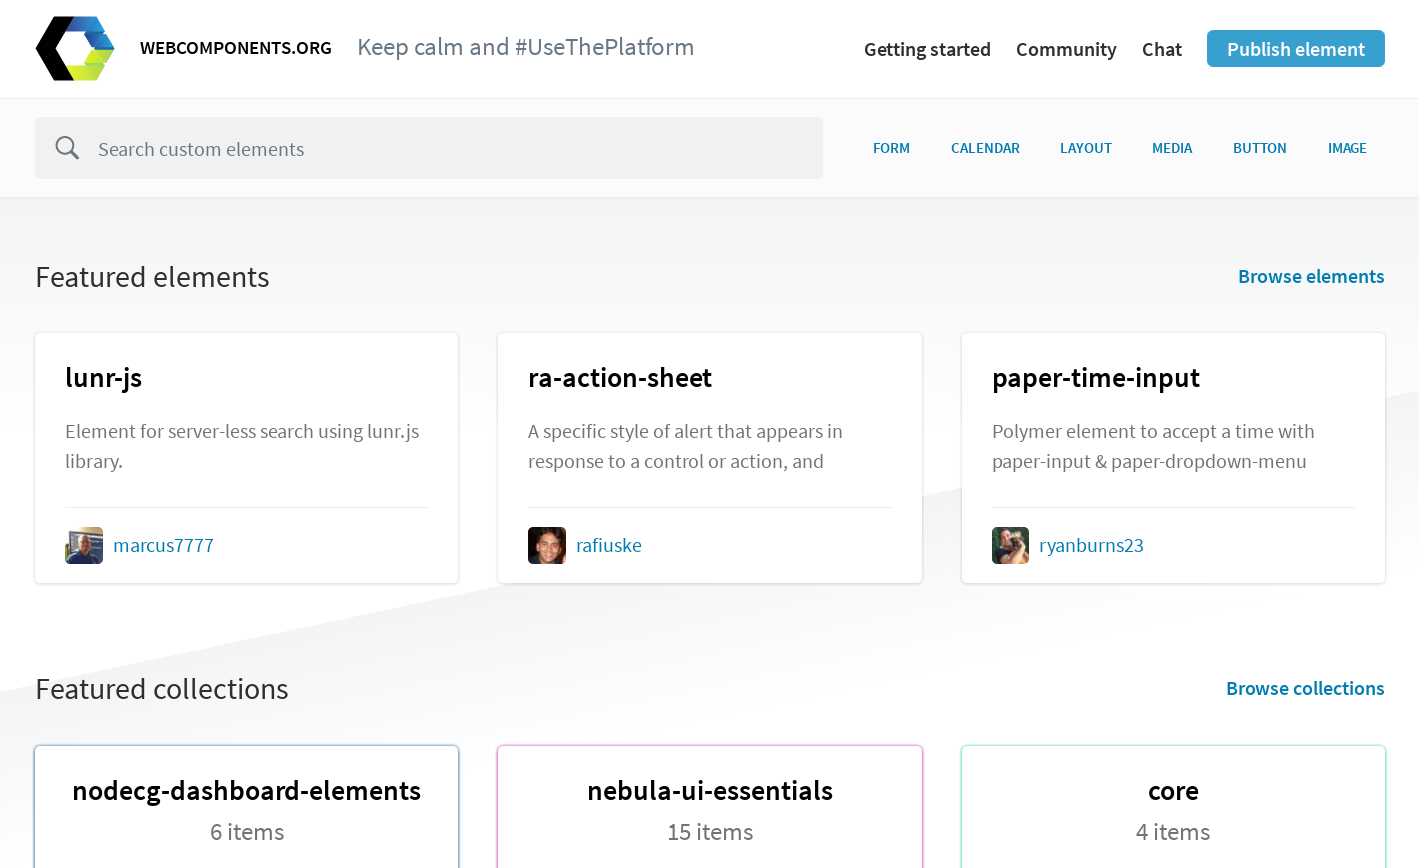 Webcomponents.org collection of web components.